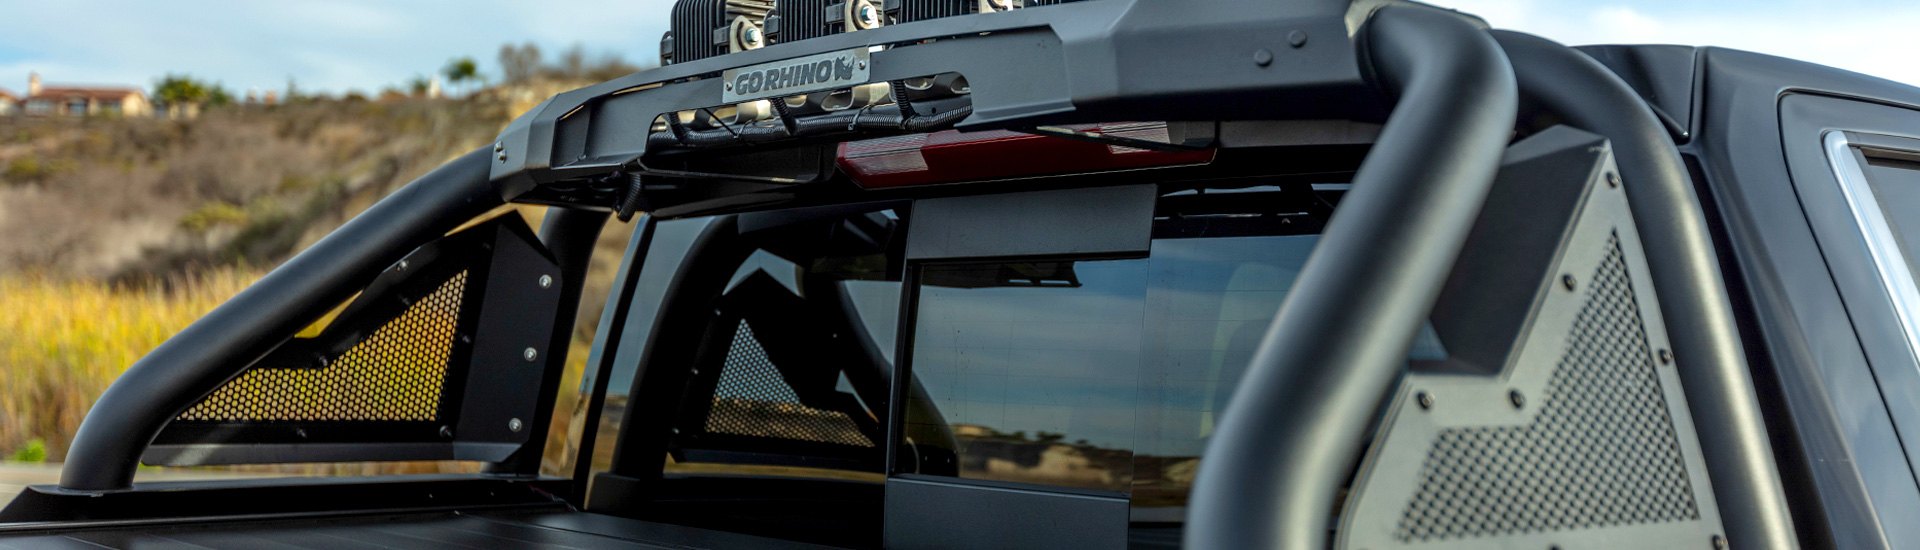 Go Rhino Sport Bar 2.0 Is Now Available For The Chevy Silverado 1500 2019 & Up